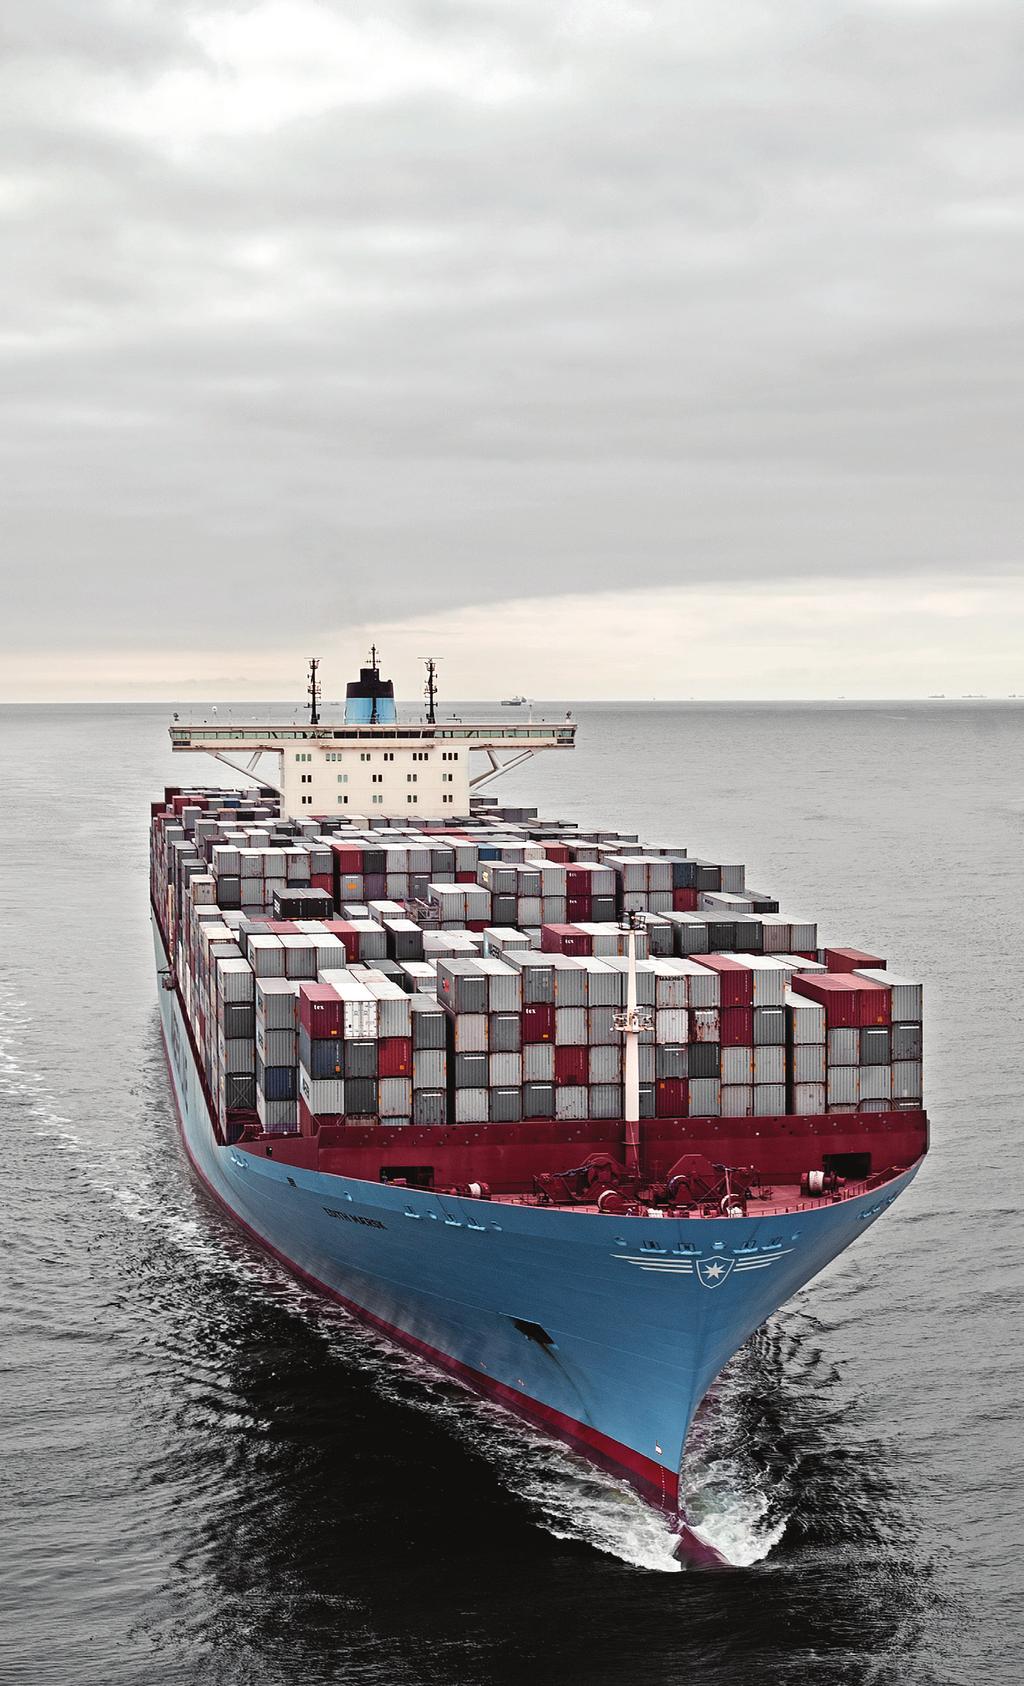 About Maersk Line Maersk Line is the world s largest container shipping company with more than 33,000 employees and 630 plus vessels Maersk Line serves customers through 306 offices in 114 countries.